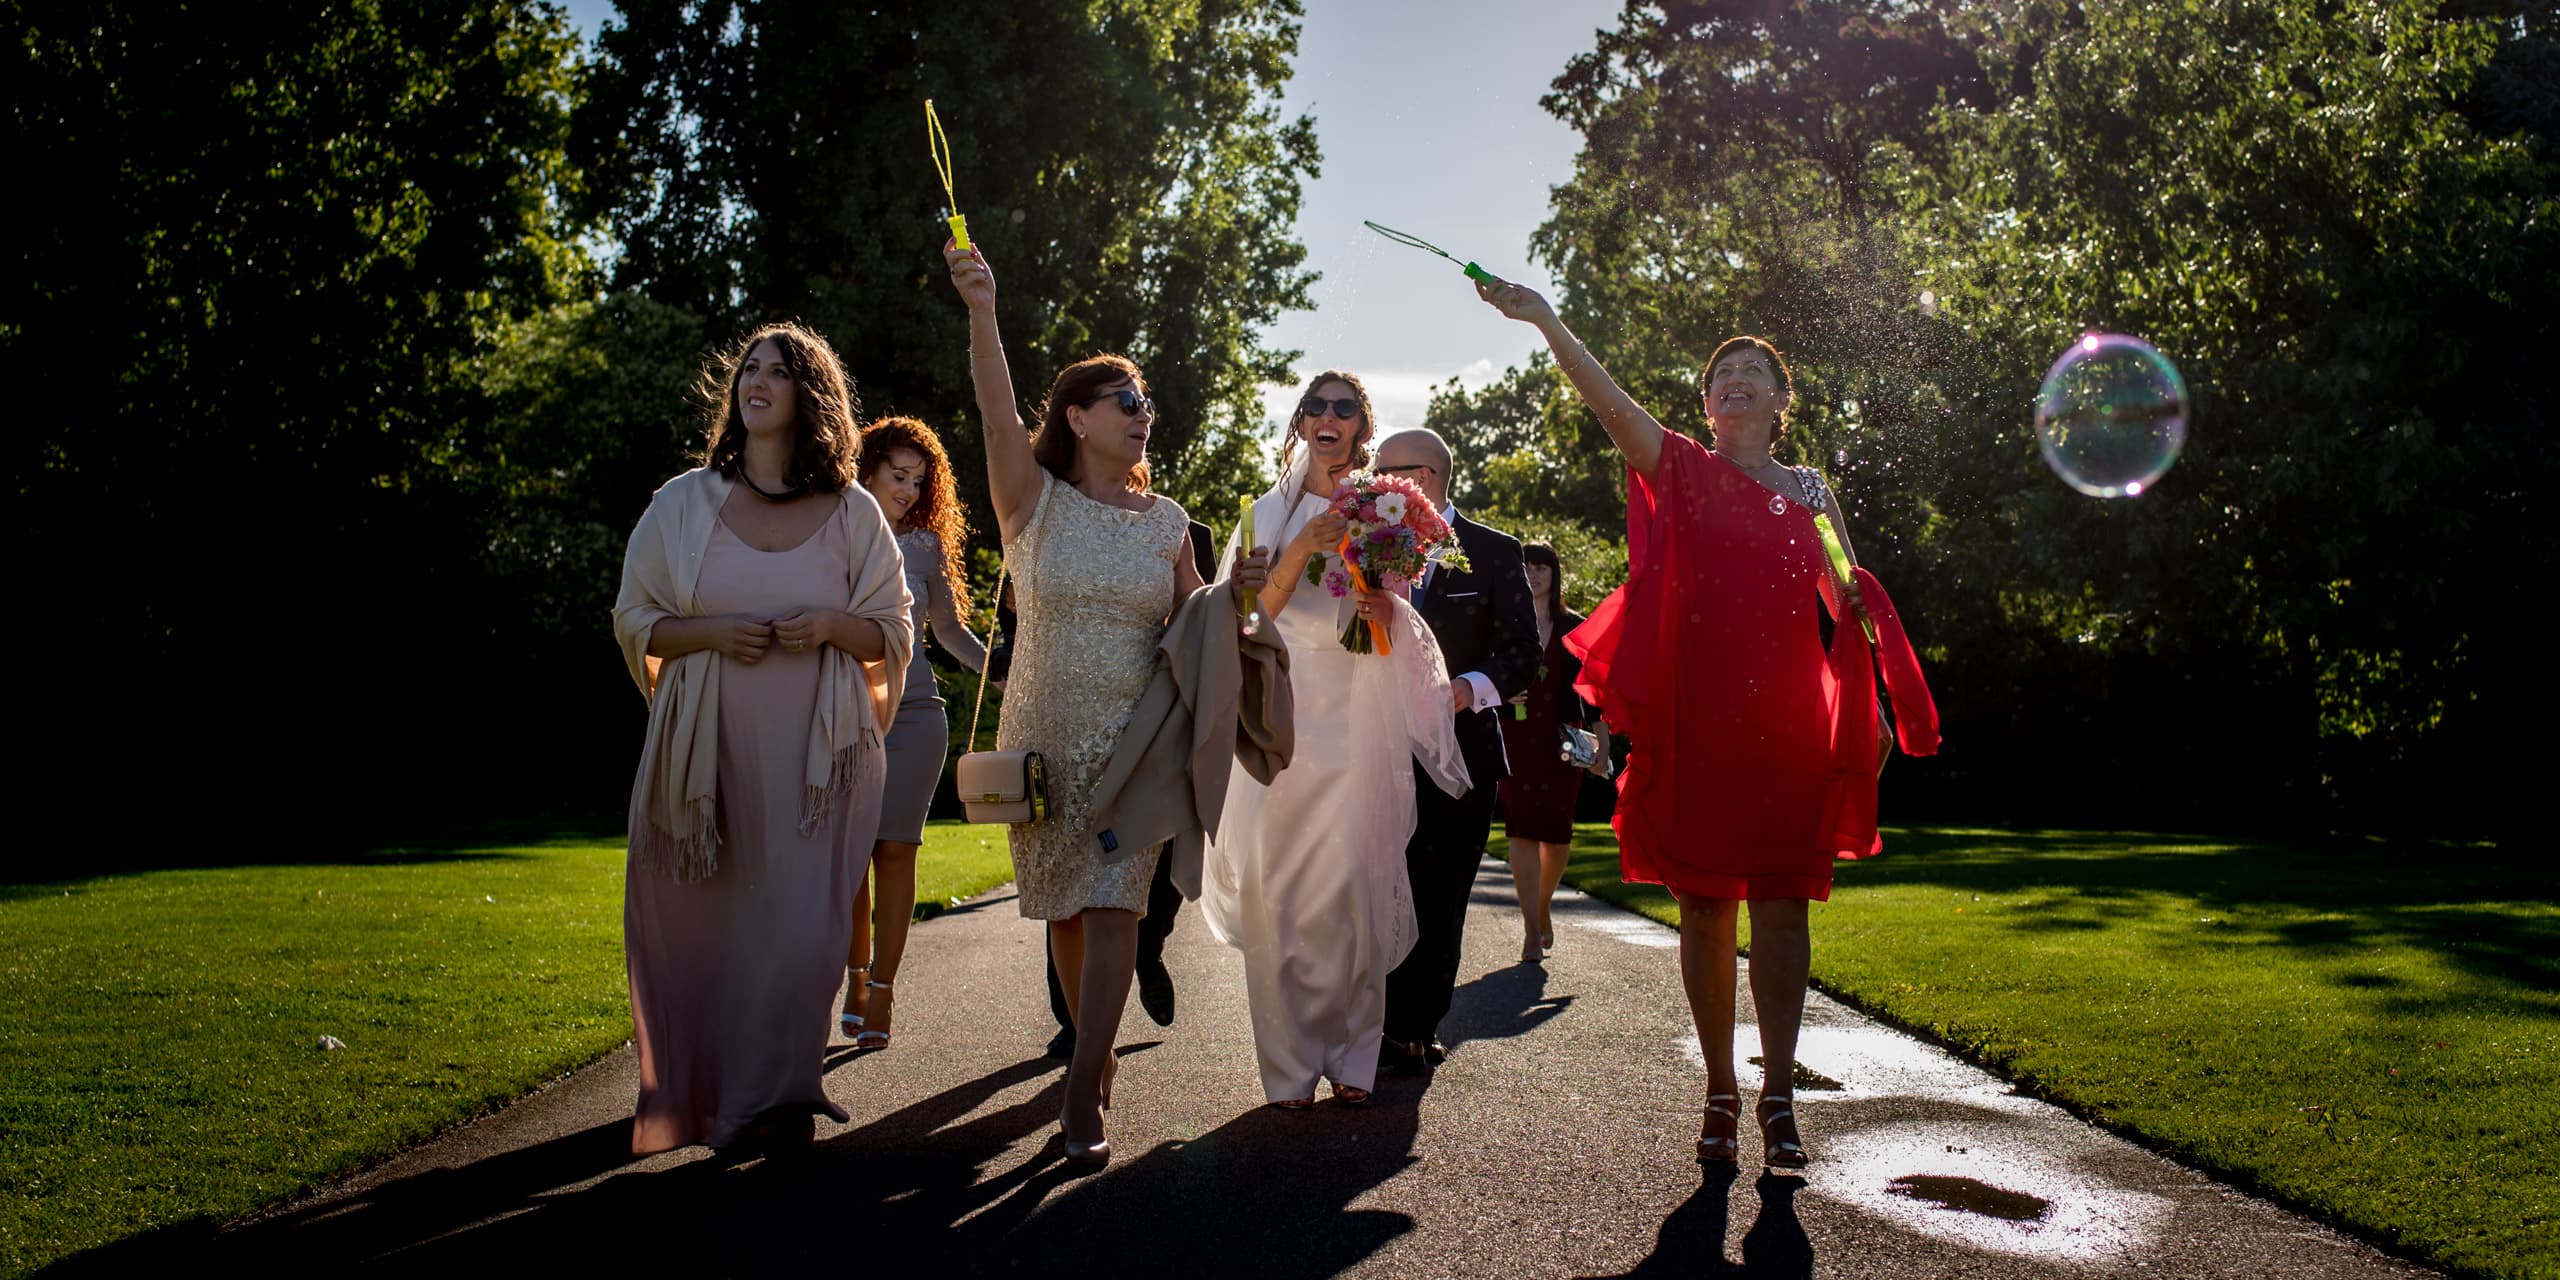 bridal party walking through Regents park with bubbles as part of their intimate London wedding celebrations